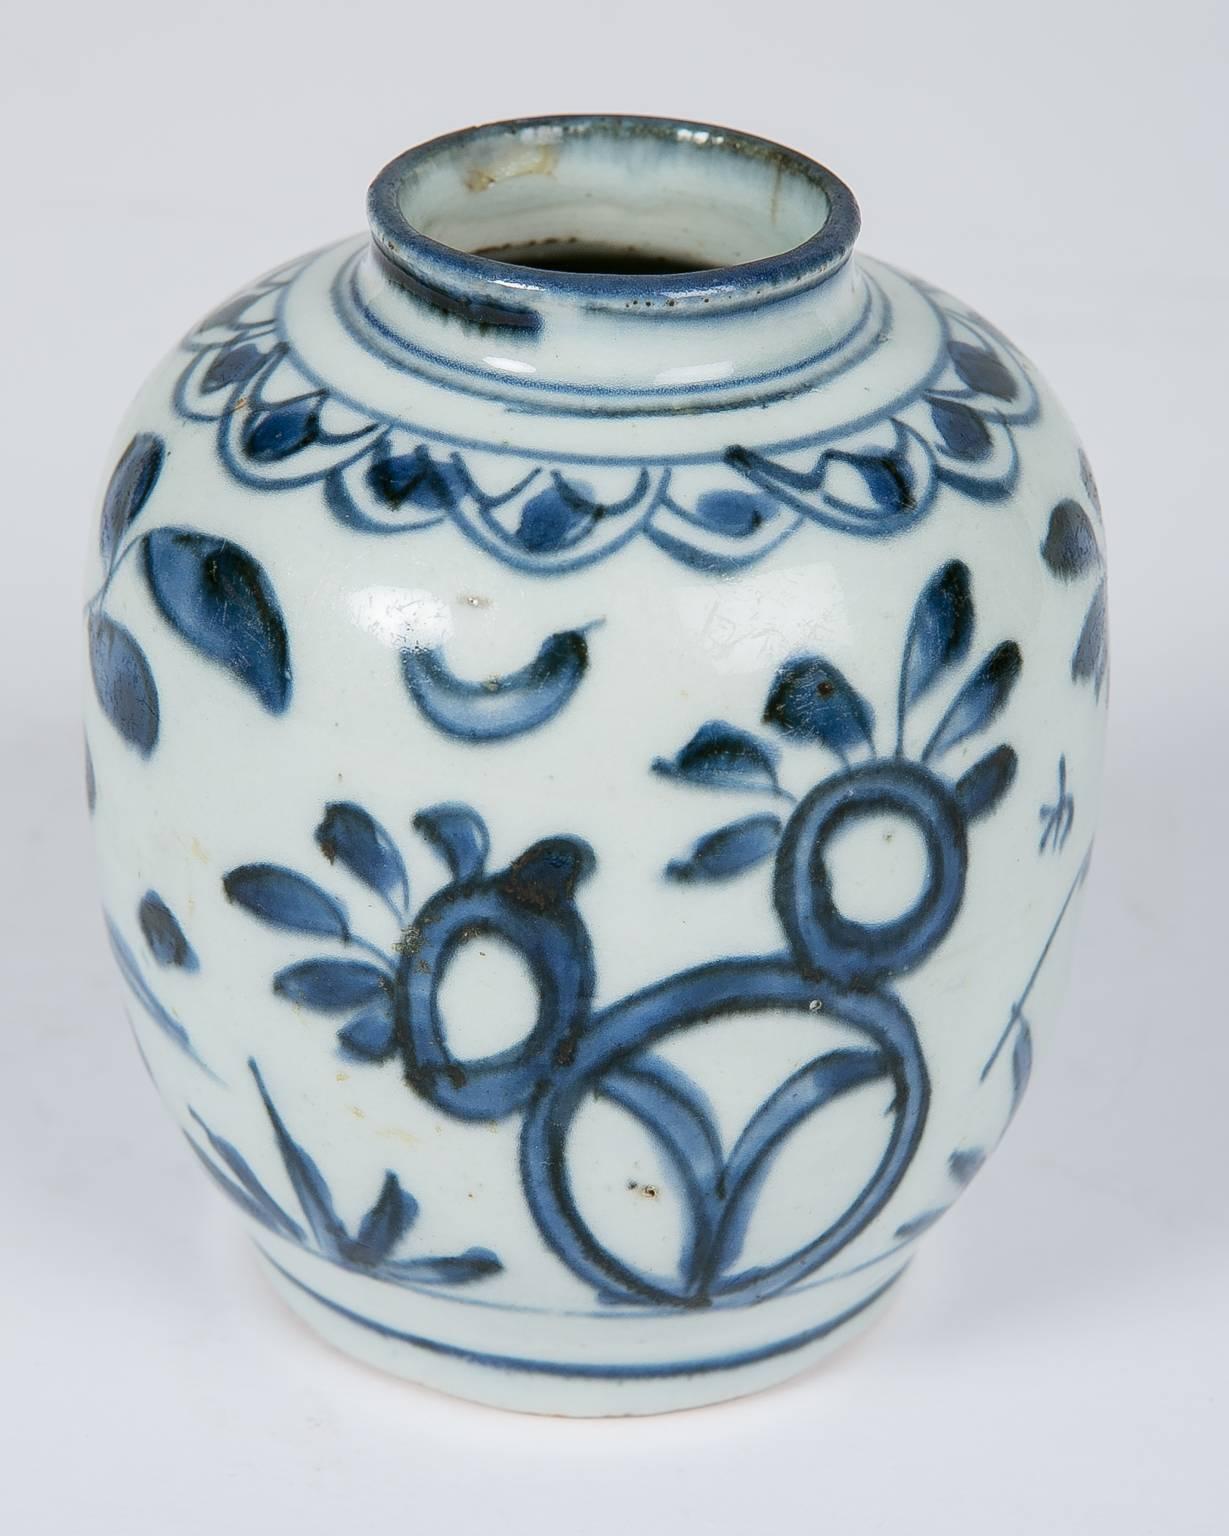 We are pleased to offer this Chinese blue and white small vase of Zhangzhou porcelain made in the early 17th century. Painted in underglaze cobalt blue the vase is decorated across the top with a fishscale pattern.
The main body is decorated with a